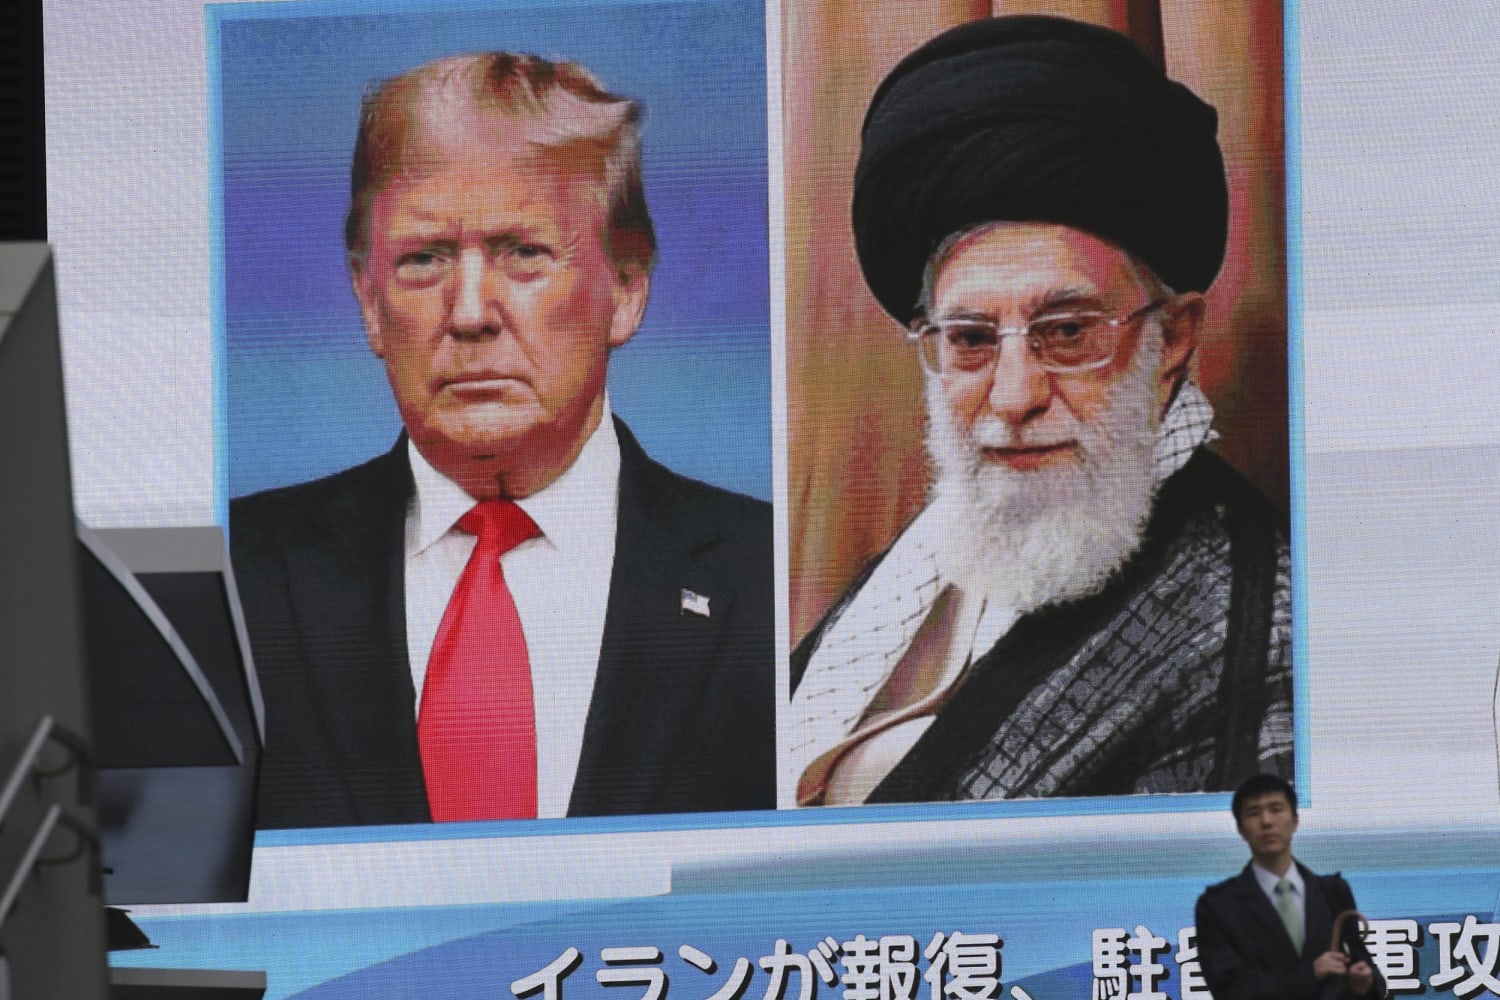 Iran leaves an off-ramp, and Trump seems inclined to take it